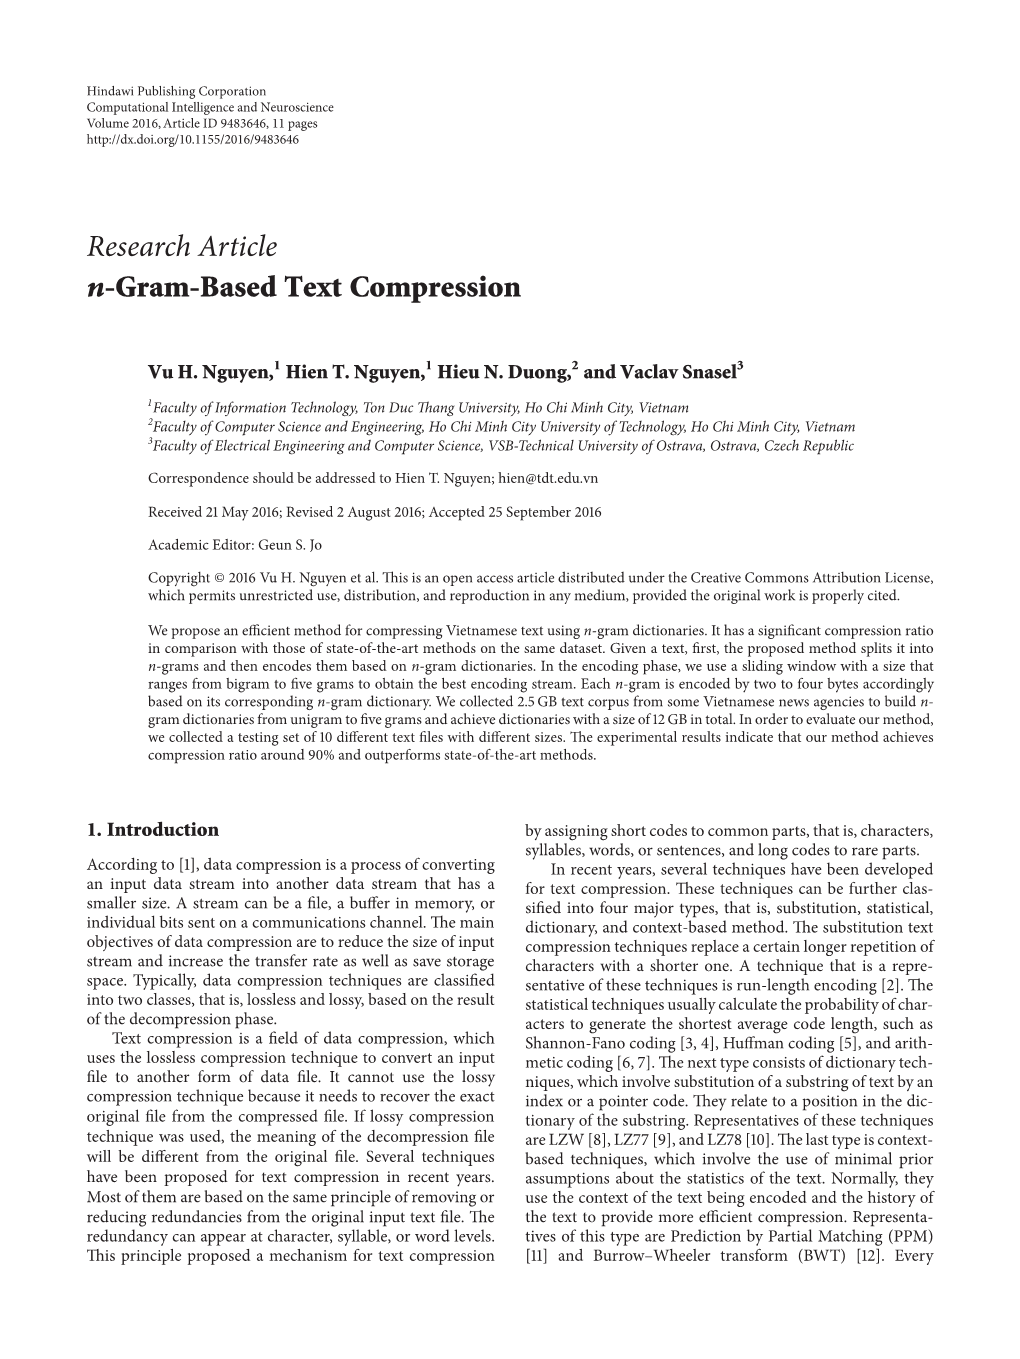 Research Article N-Gram-Based Text Compression